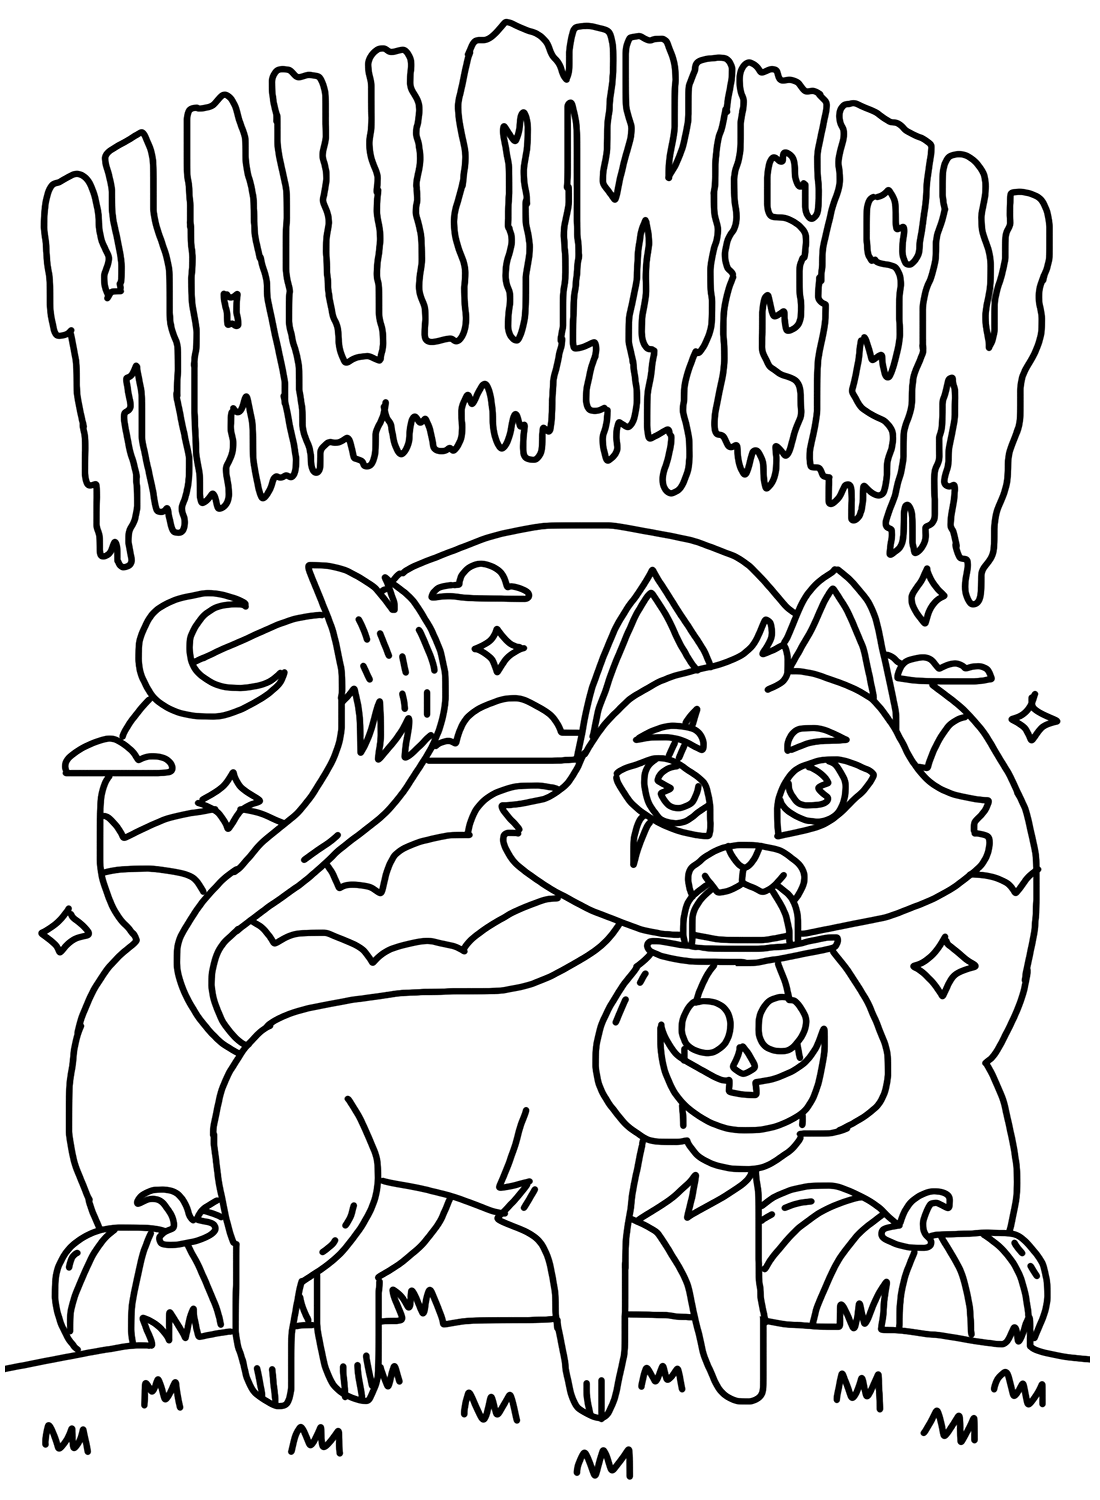 Happy Halloween Coloring Pages Free - Free Printable Coloring Pages